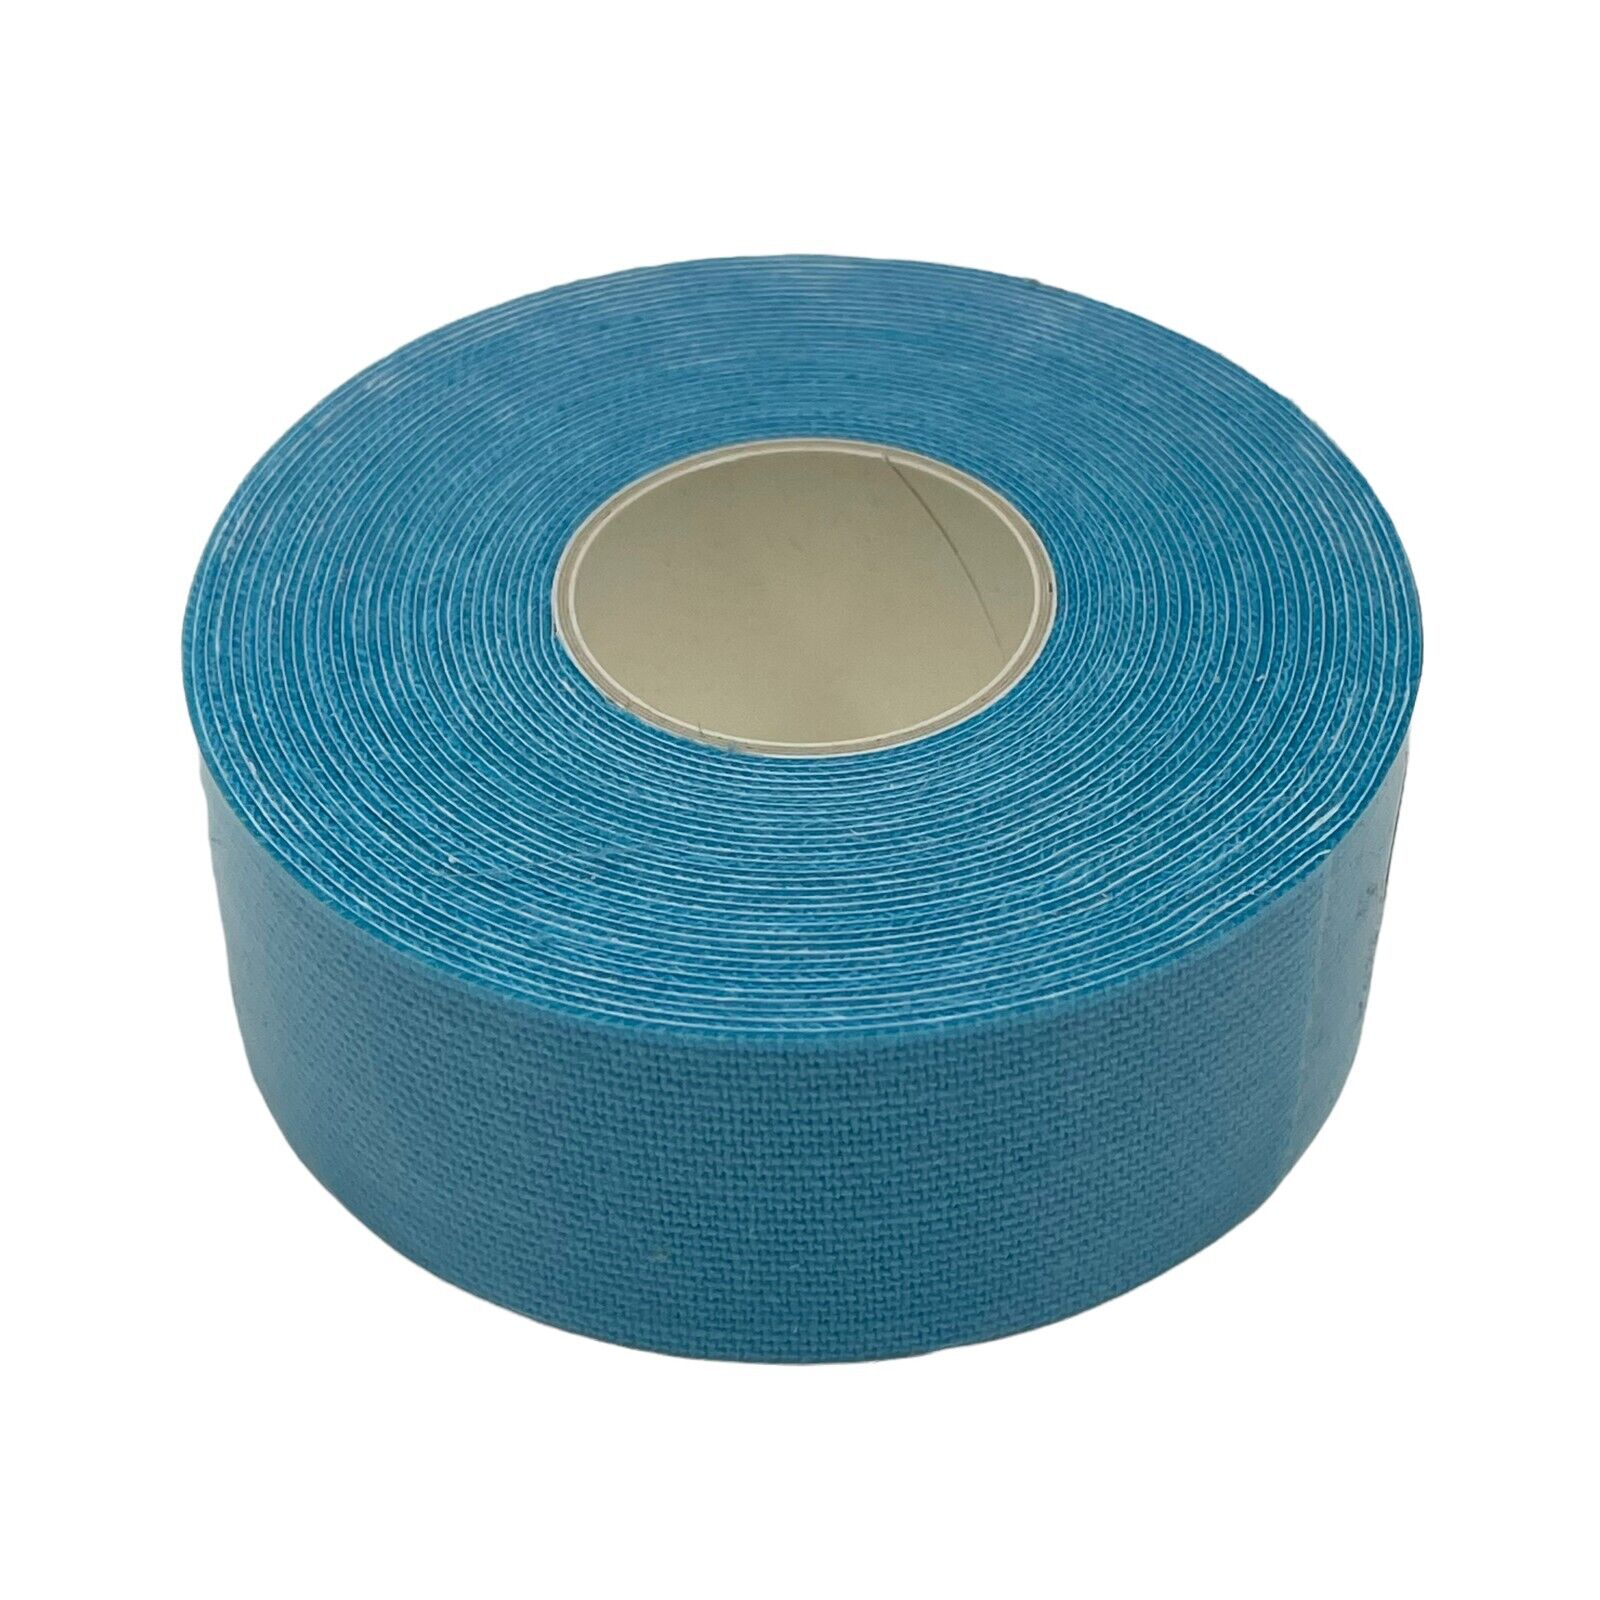 Wholesale Lot x 6 Rolls of Bowling Thumb Finger Hada Patch Protection Tape Unbranded Does Not Apply - фотография #7